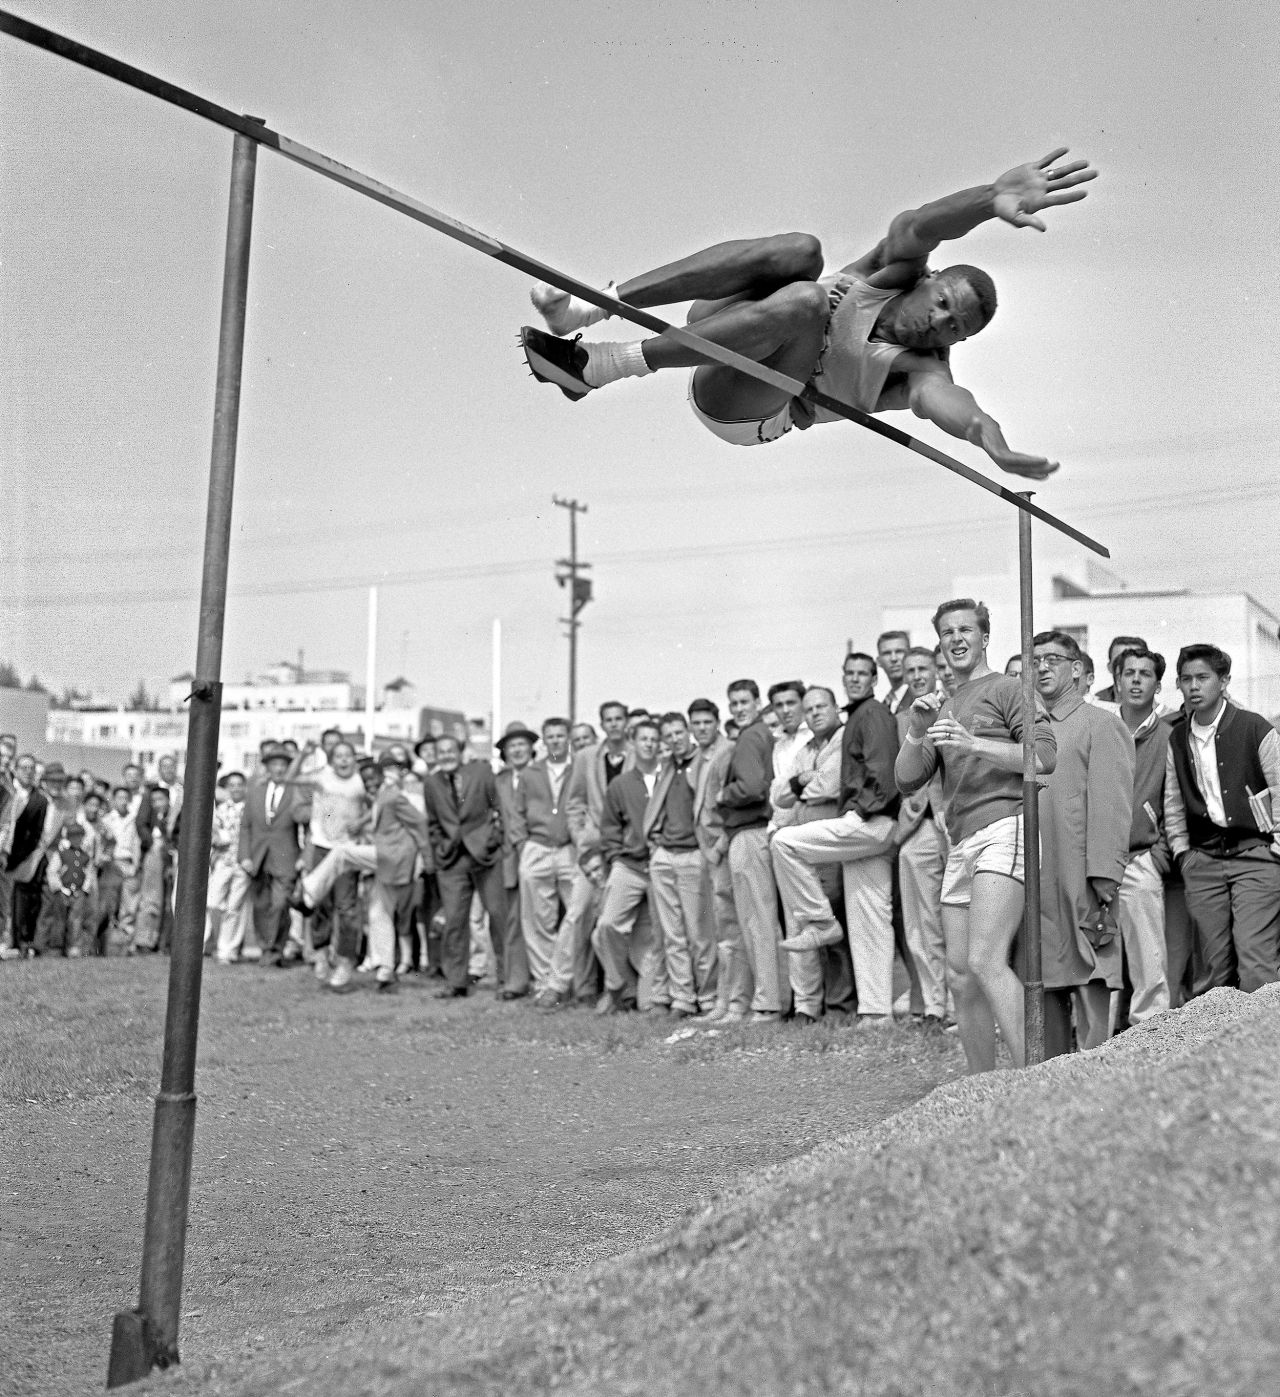 Russell competes in the high jump for University of San Francisco during a track meet in April 1956. In the same month, Russell would be selected second overall in the NBA draft by the St. Louis Hawks, before being traded to the Boston Celtics.